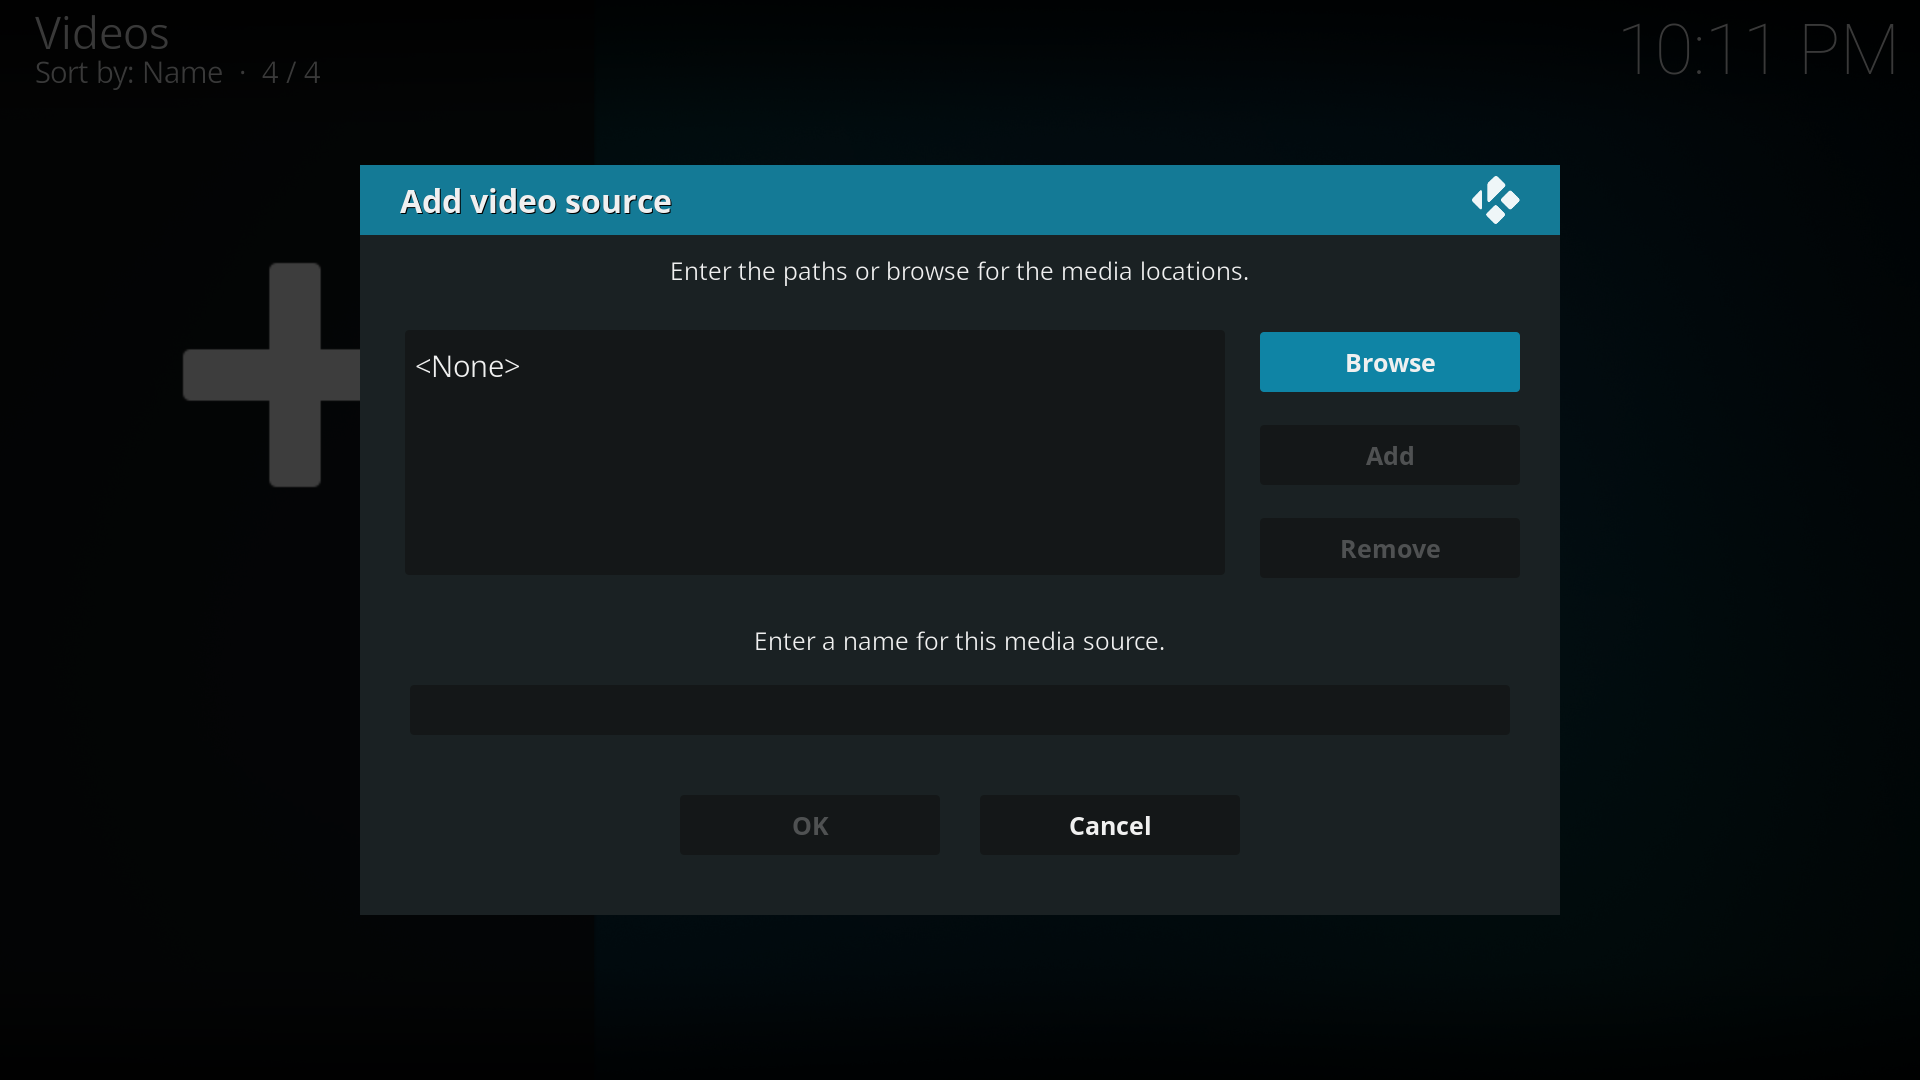 Step 3: The "Add Video Source" screen will be displayed. Then select the "Browse" button. Note: You can also type a local or network file path directly into this box, if you already know the address/path. For example, smb://192.162.0.4 could be typed in directly and saved, which will skip the "browsing" step.